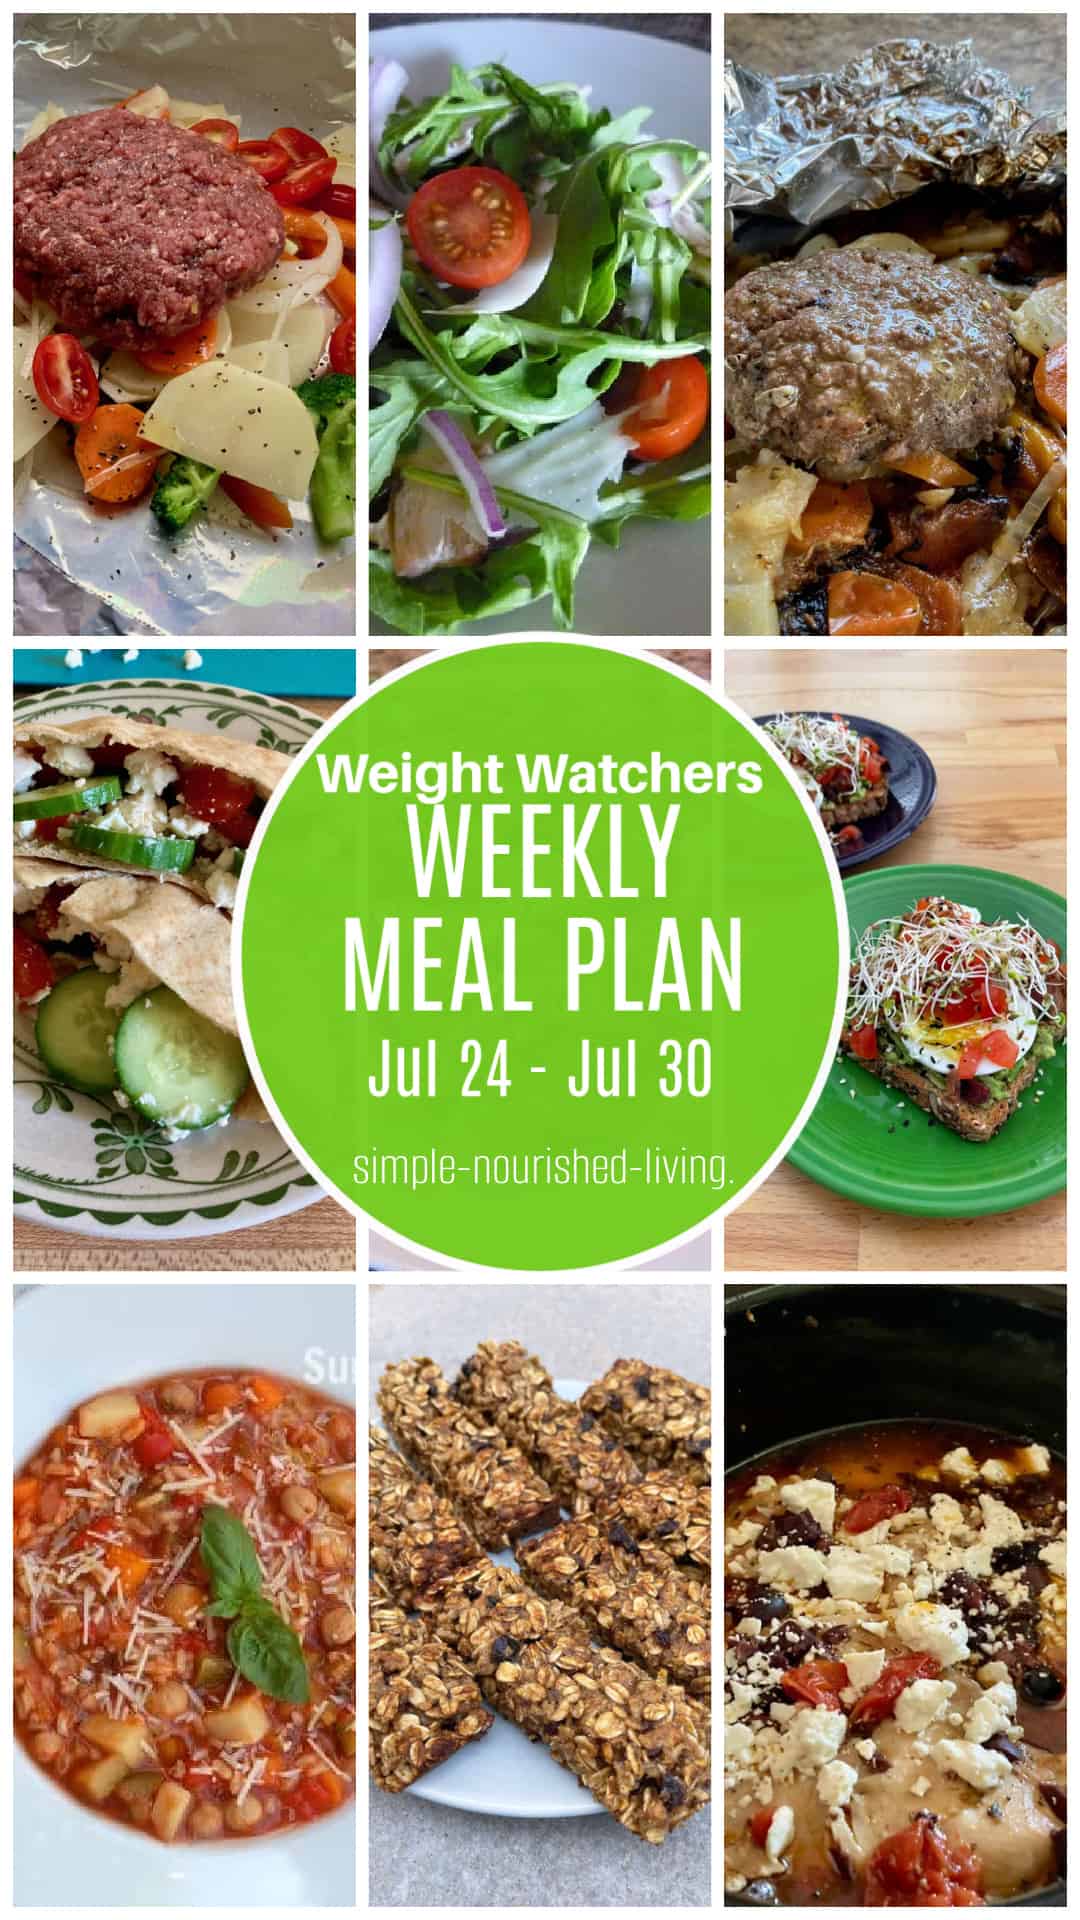 9 Frame Food Collage with Green Round Text Box Overlay: Weight Watchers Weekly Meal Plan July 24 to July 30 Food Pictured includes hamburger foil pack meals, vegetable hummus pita pockets, arugula salad, avocado egg toast blt, summer vegetable minestrone soup, oatmeal spice granola bars, slow cooker greek chicken in black crockpot